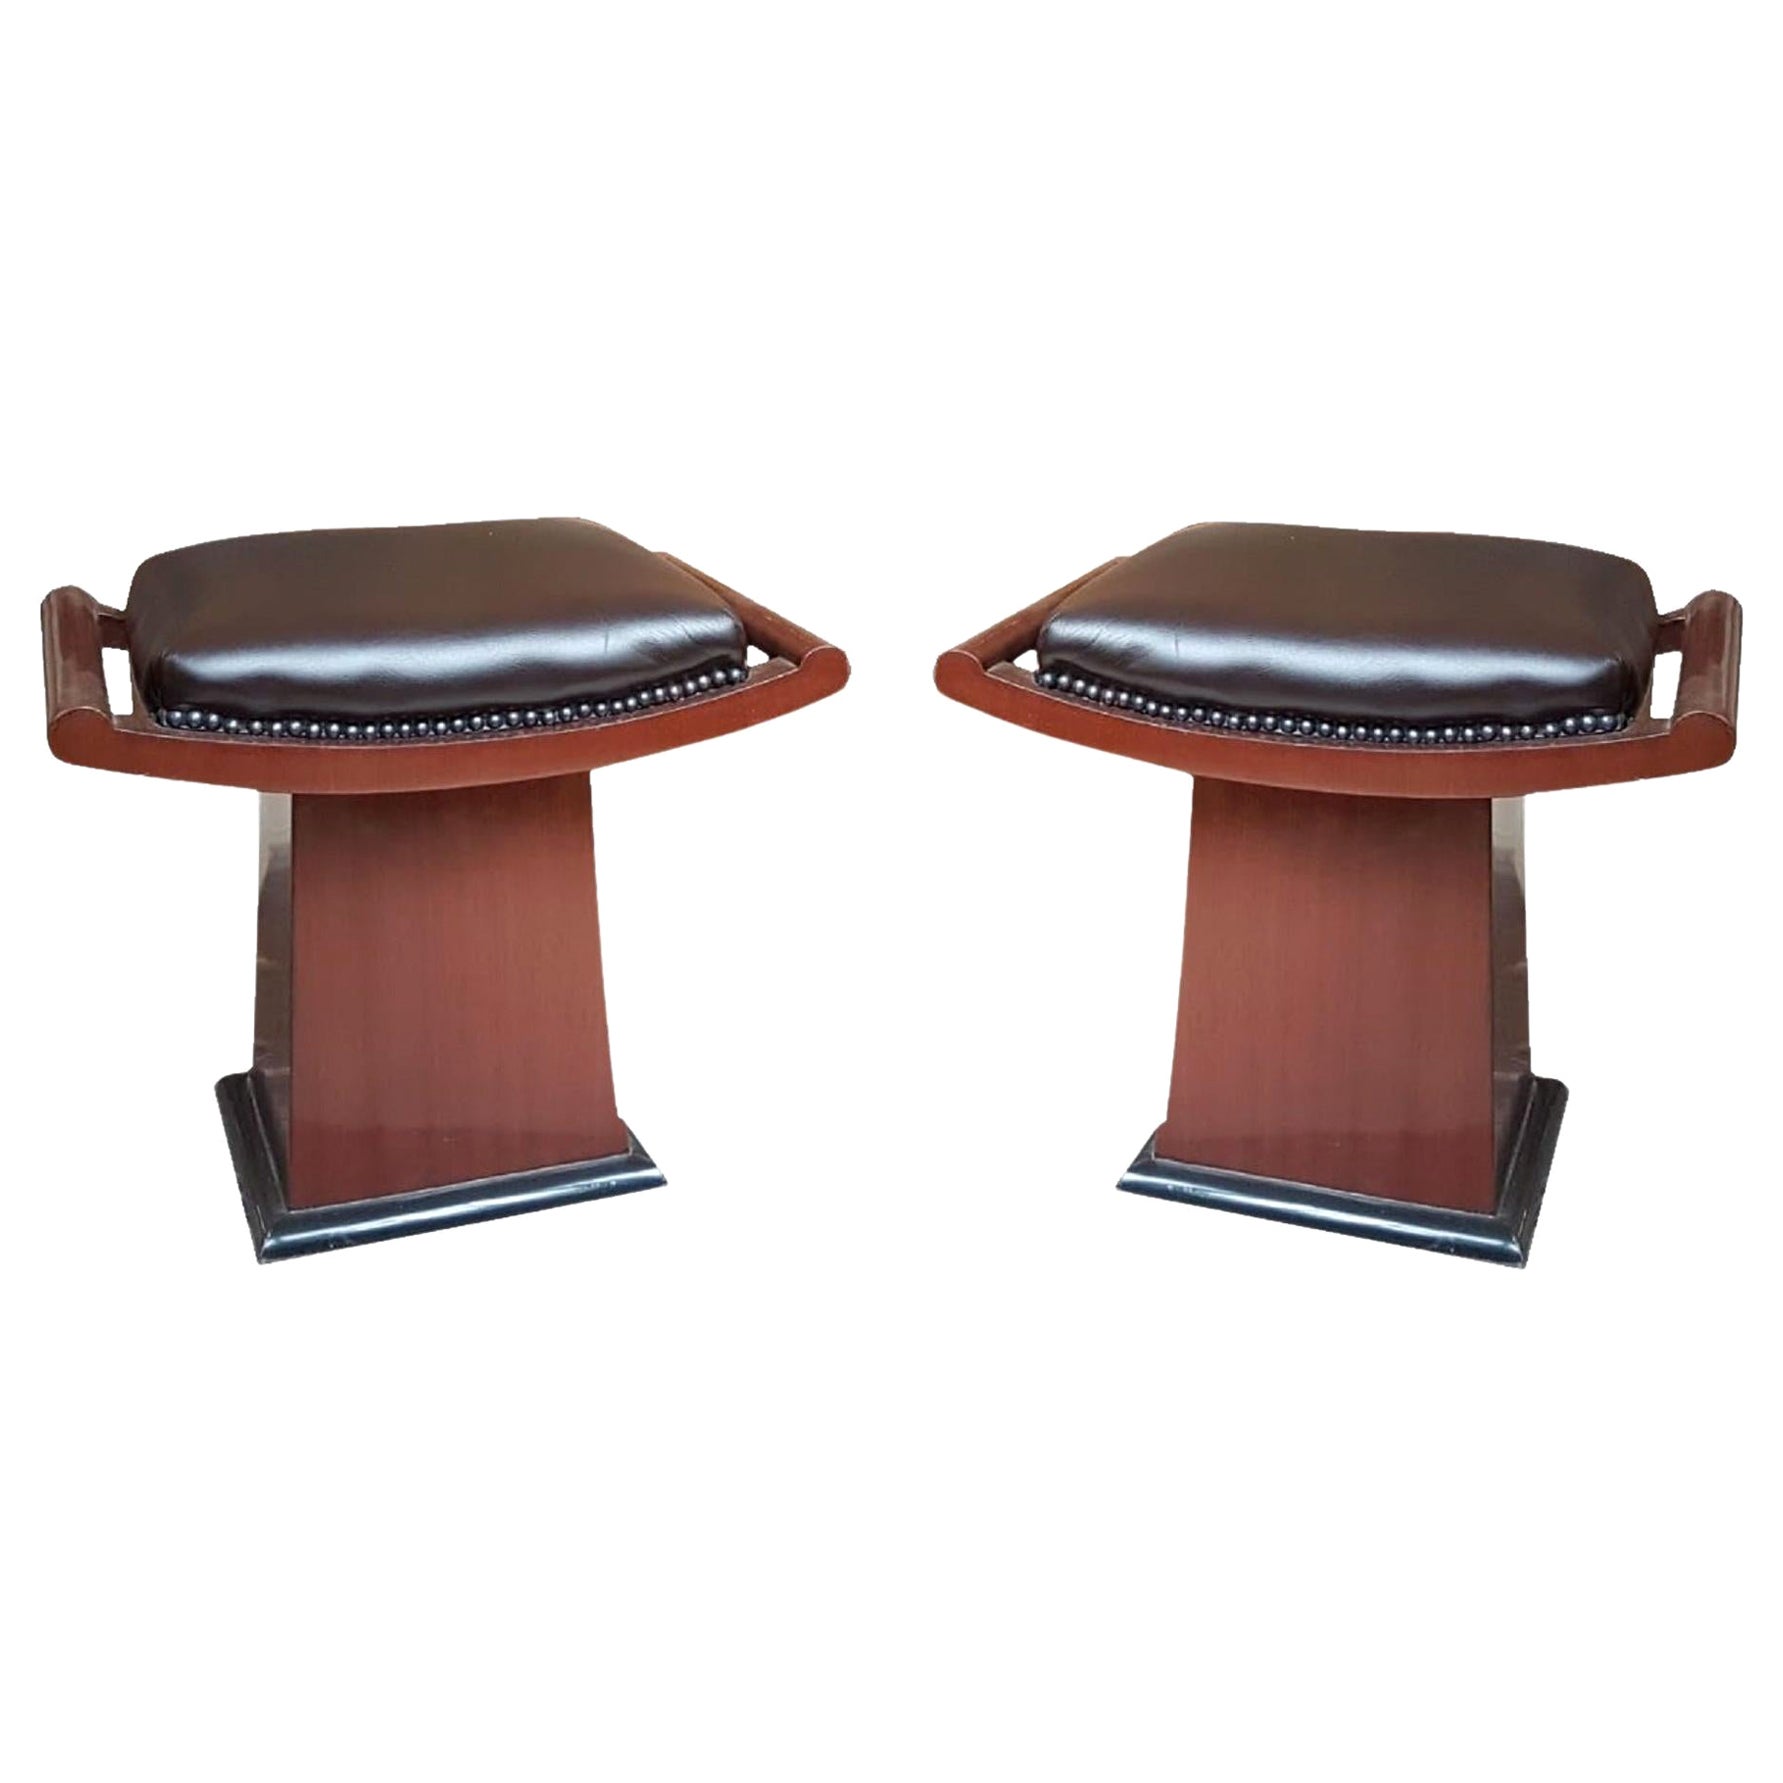 2 Amaizing Art Deco Stool in Leather and Wood, France, 1940 For Sale